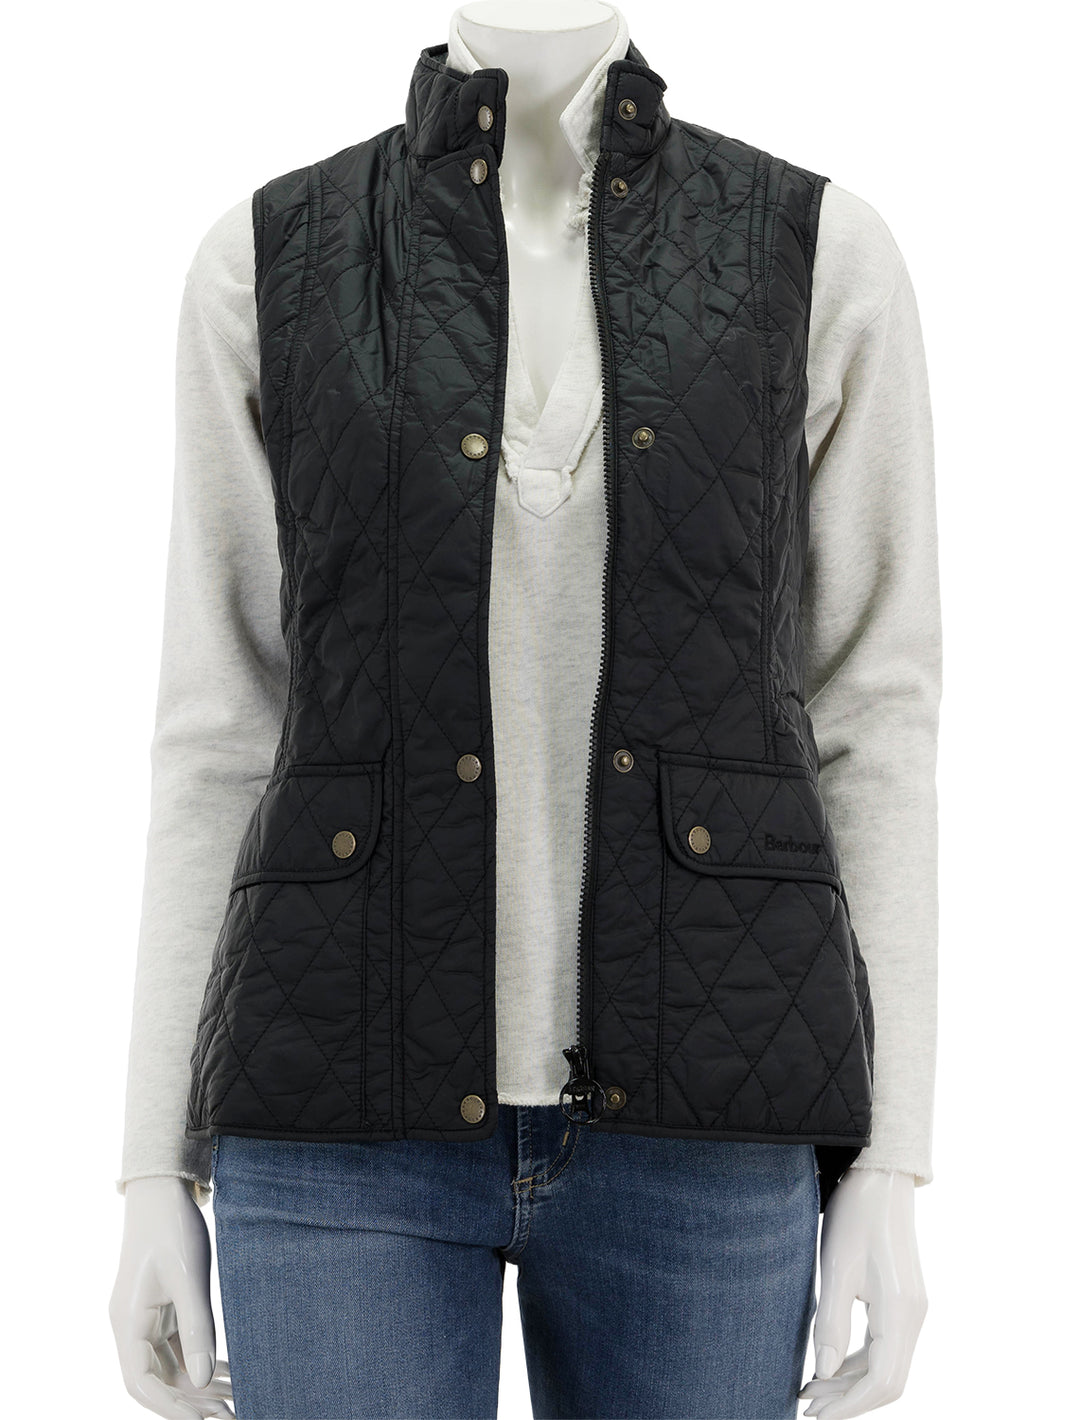 Front view of Barbour's otterburn gilet in black, unzipped.